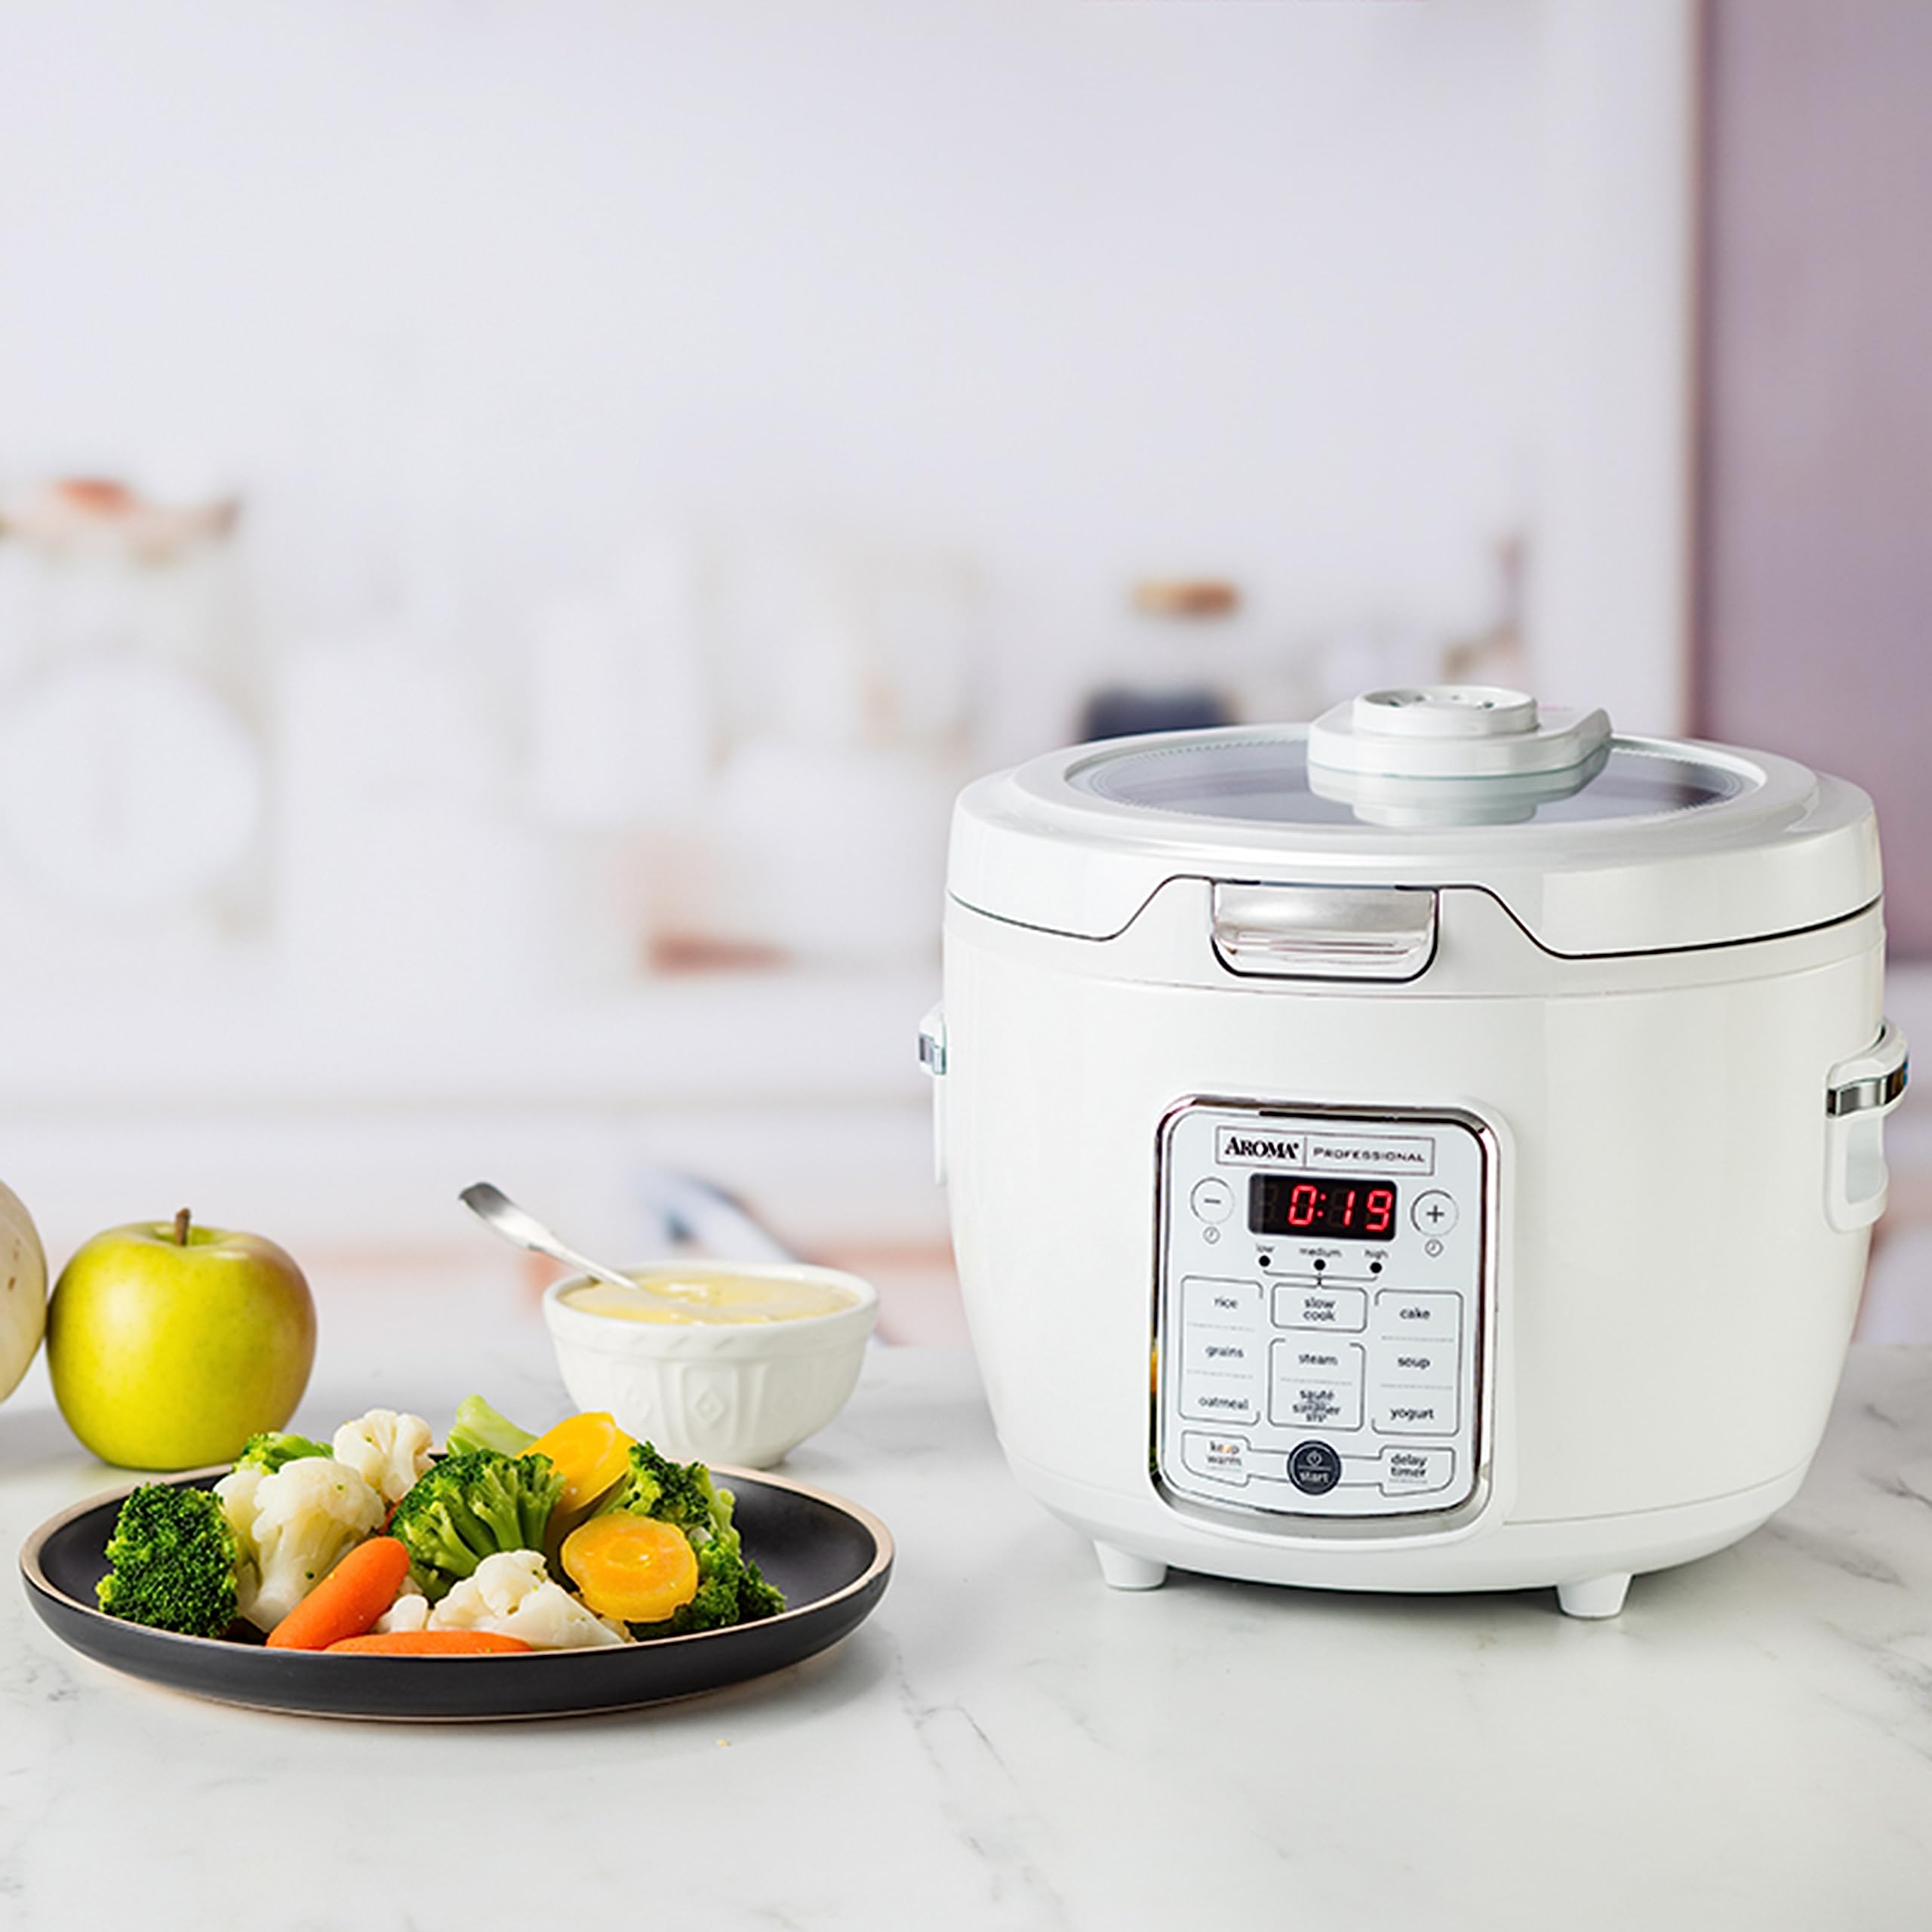 Aroma Housewares Professional 20-Cup(cooked) / 4Qt. Digital Rice Cooker/Multicooker, Automatic Keep Warm and Sauté-then-Simmer Function, white (ARC-1230W)